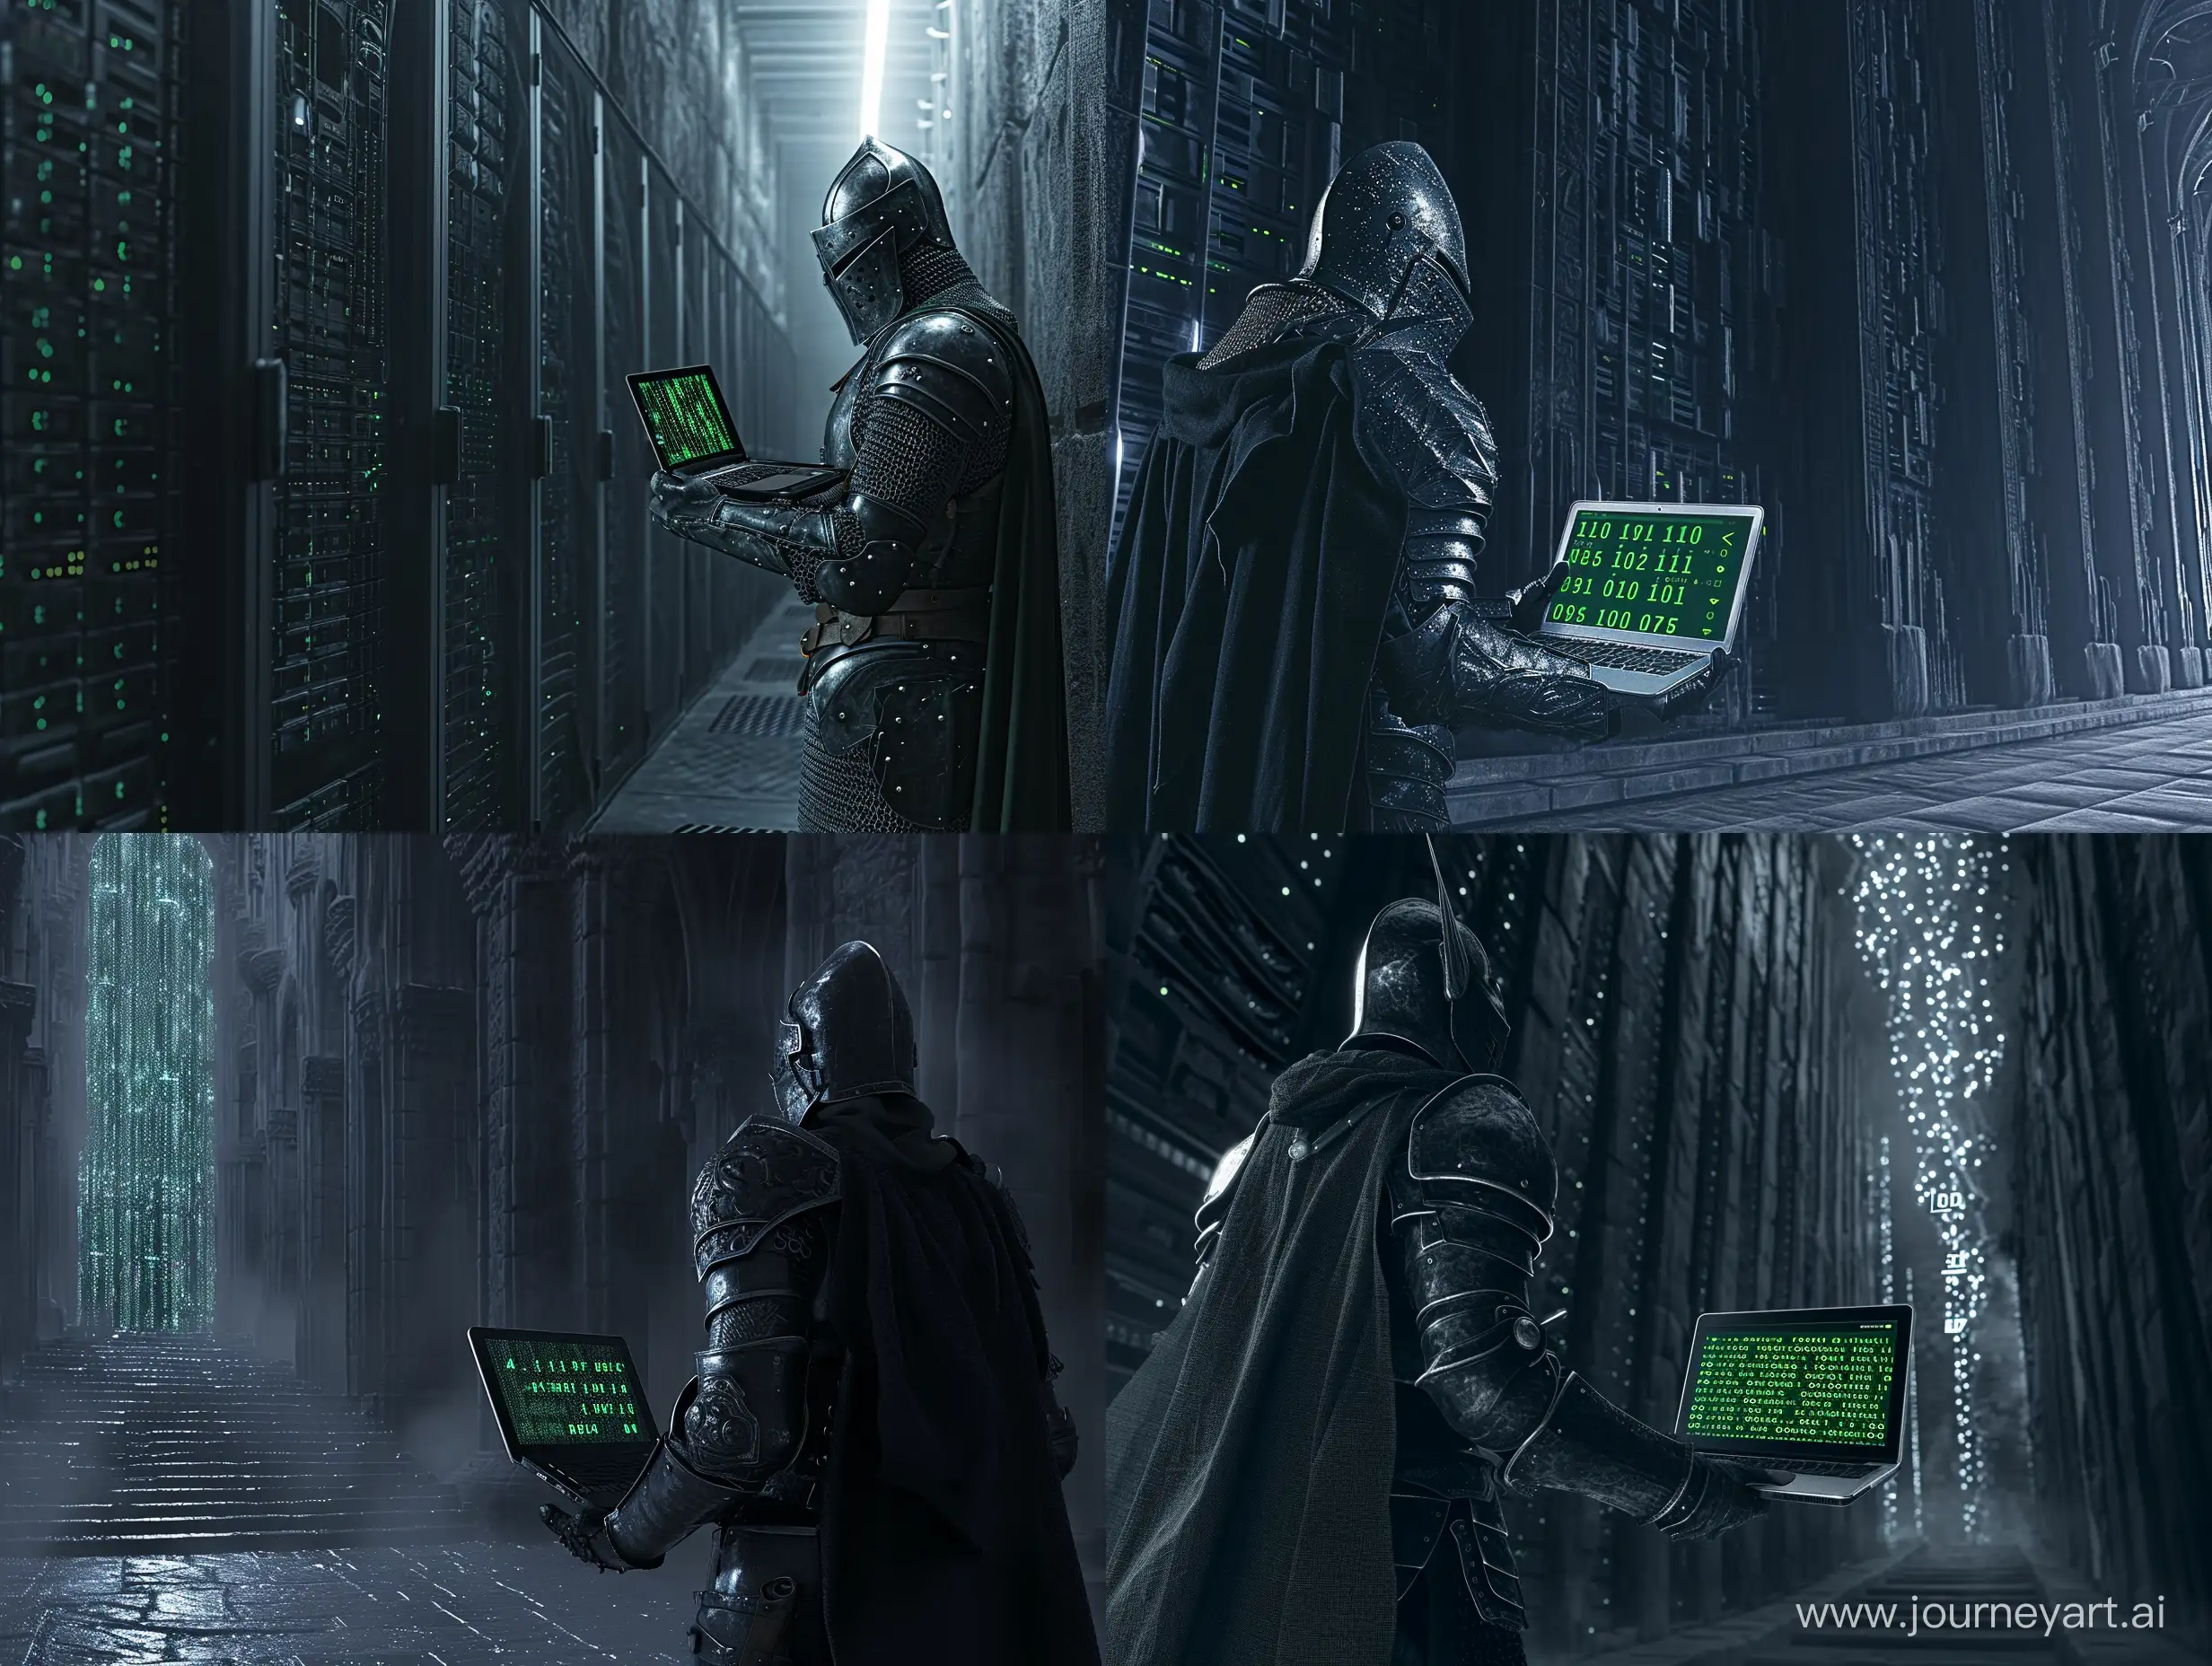 a dark medieval knight facing a gloomy ominous datacenter holding a laptop with green binary on its screen. low angle, low exposure